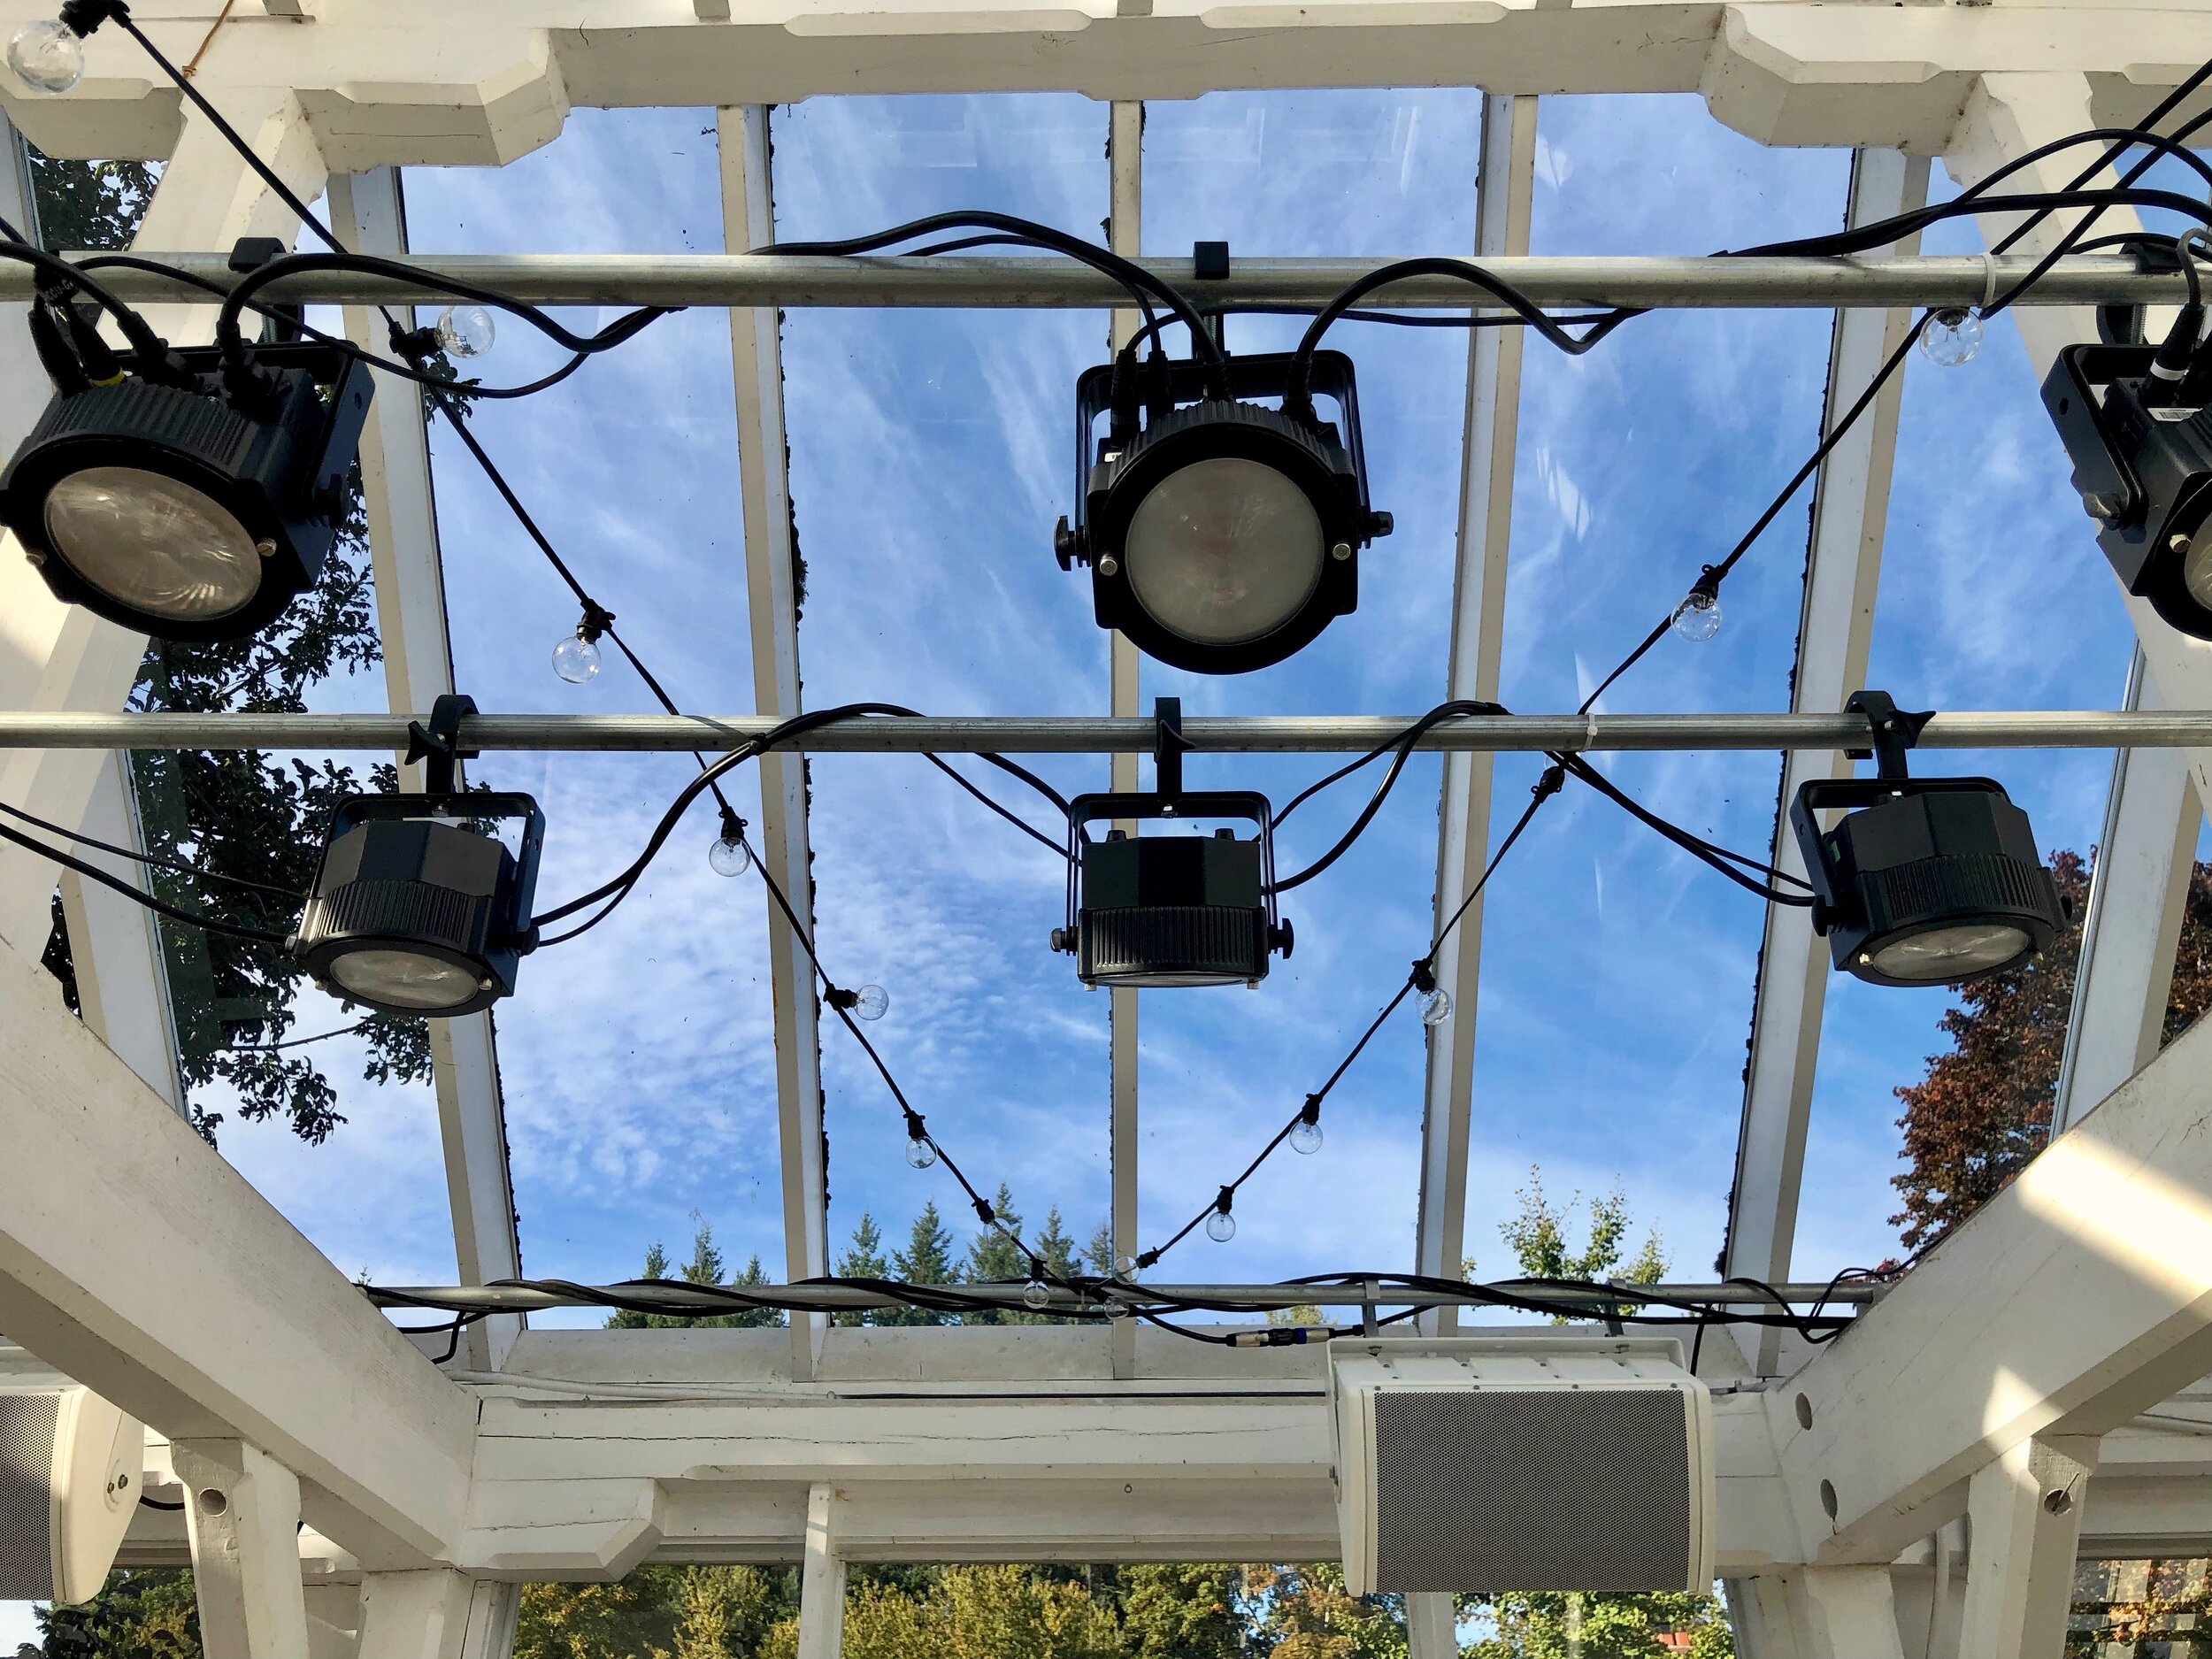 ADJ Dotz Par LED Wash Lights and Danley Sound Labs GO2-8CX Speakers mounted overhead in a greenhouse dance floor at Starling Lane Vineyard, 2021